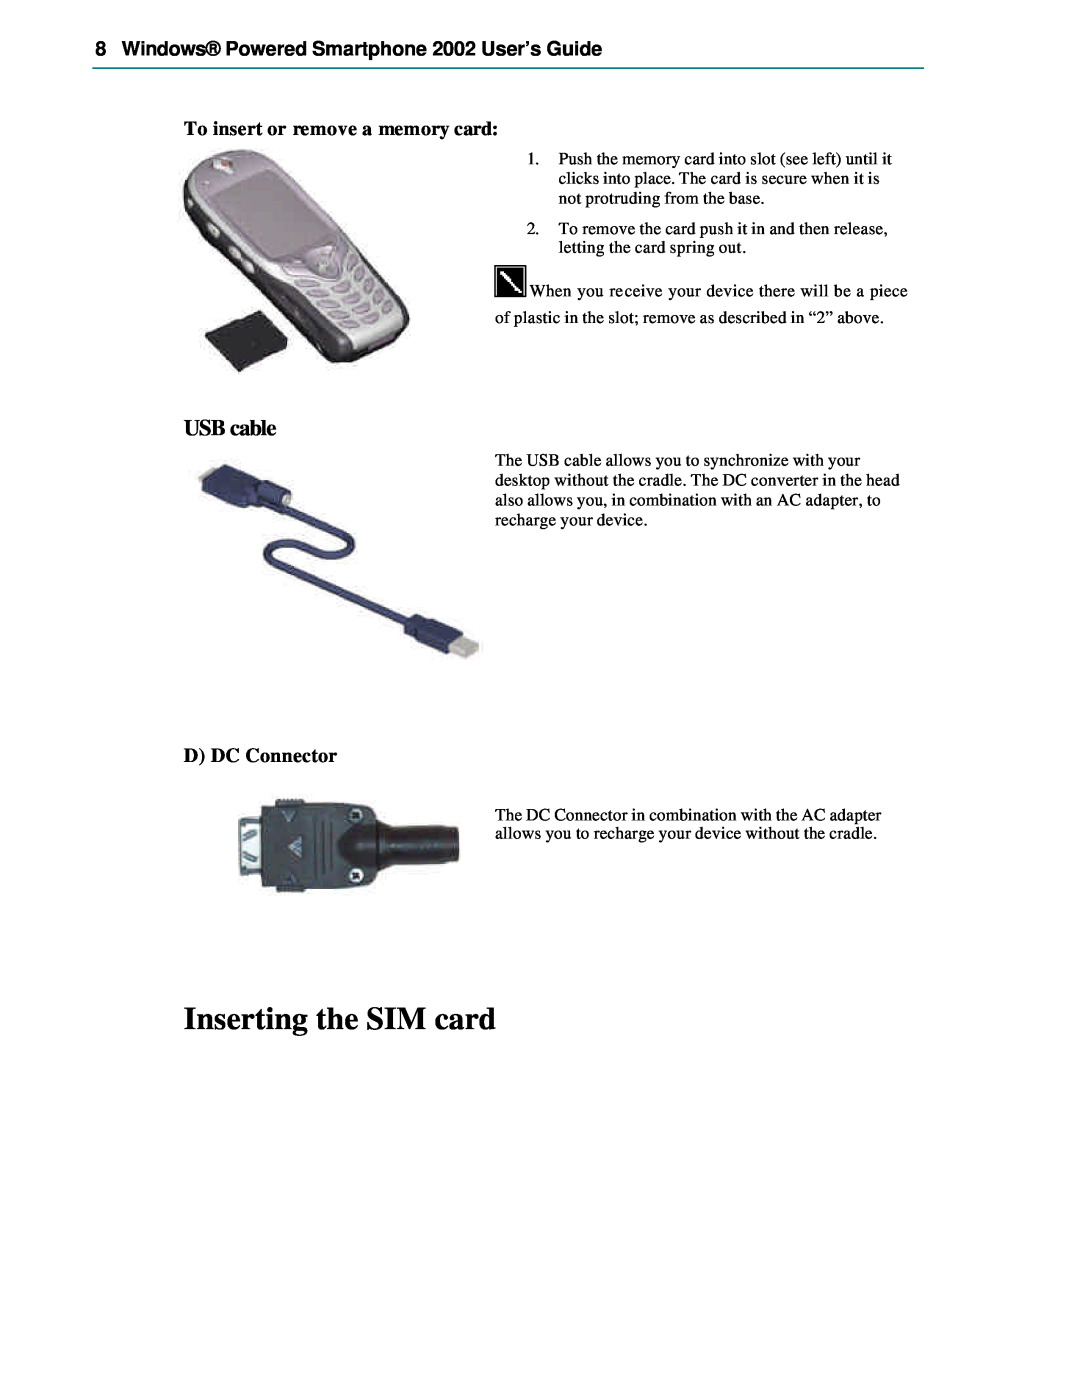 Microsoft manual Inserting the SIM card, USB cable, Windows Powered Smartphone 2002 User’s Guide, D DC Connector 